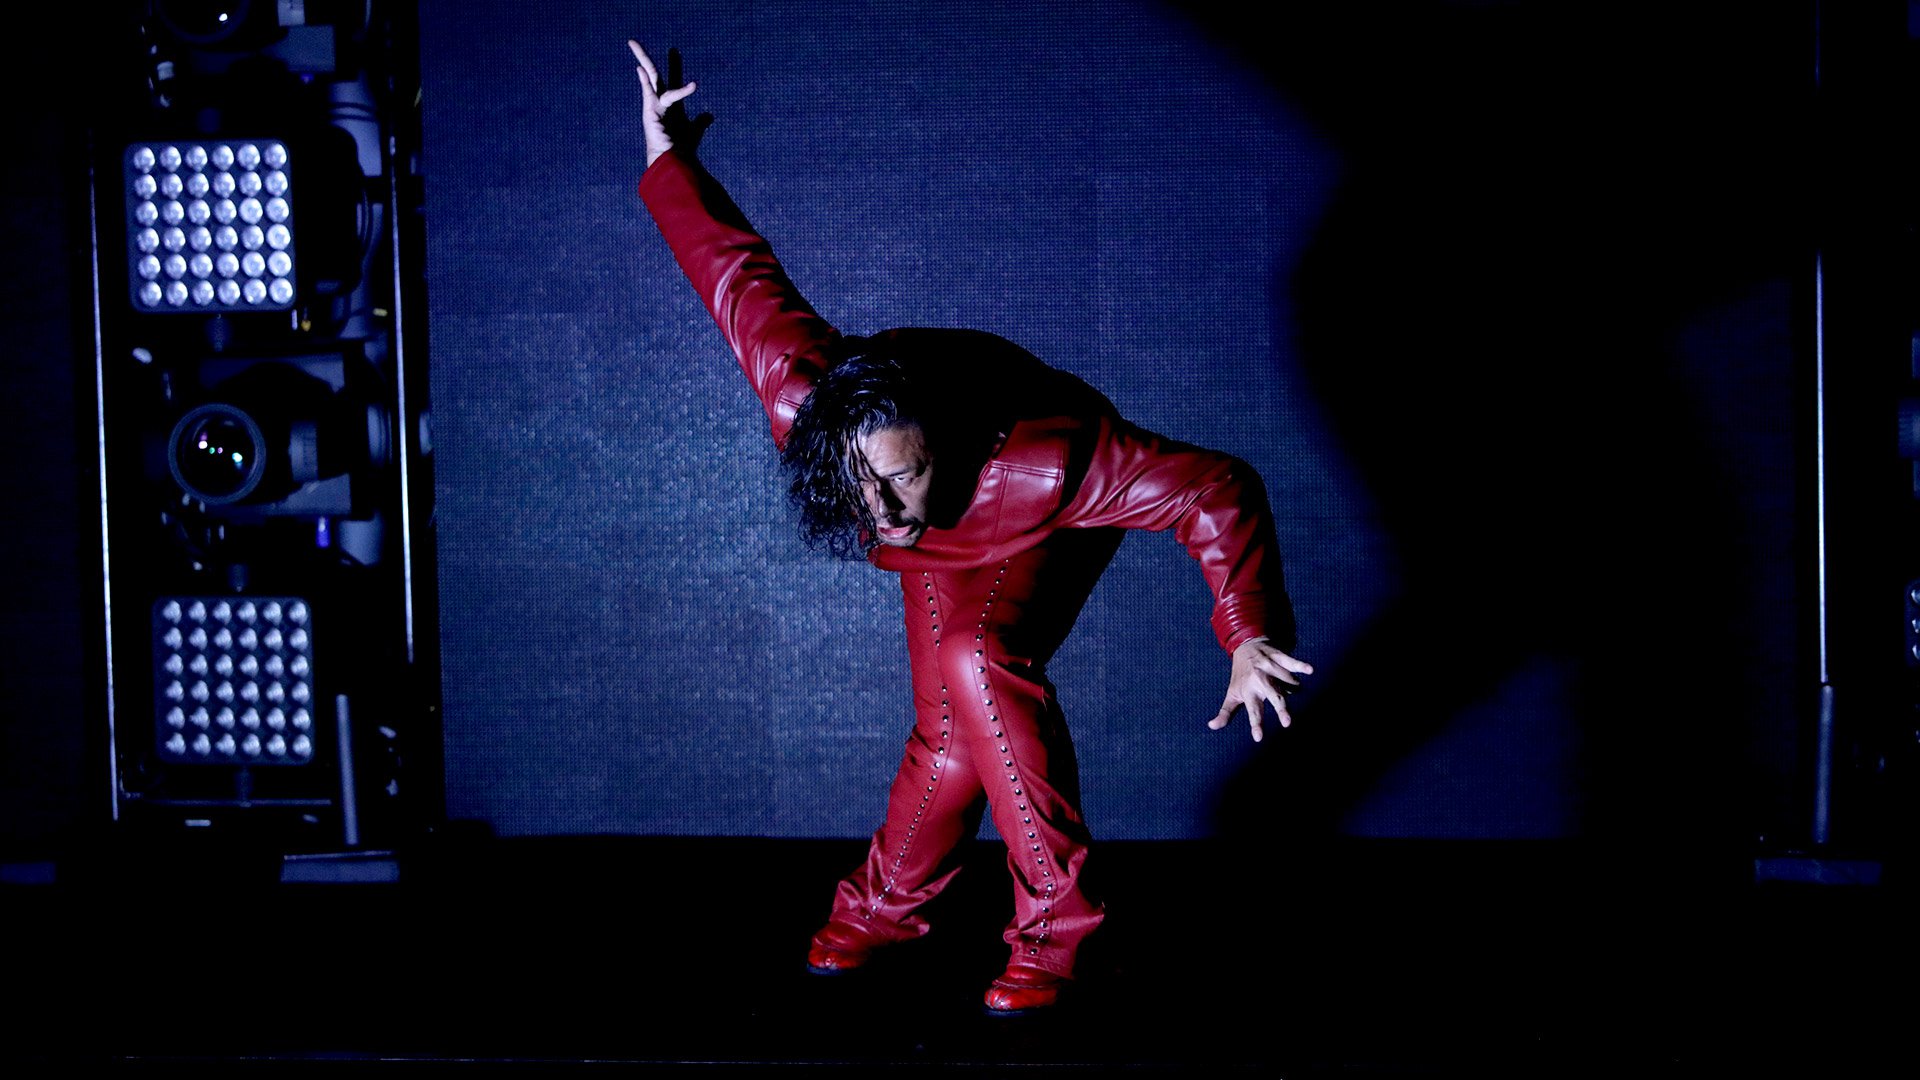 Nakamura Makes His Entrance For His Bout With Austin - Shinsuke Nakamura Entrance , HD Wallpaper & Backgrounds